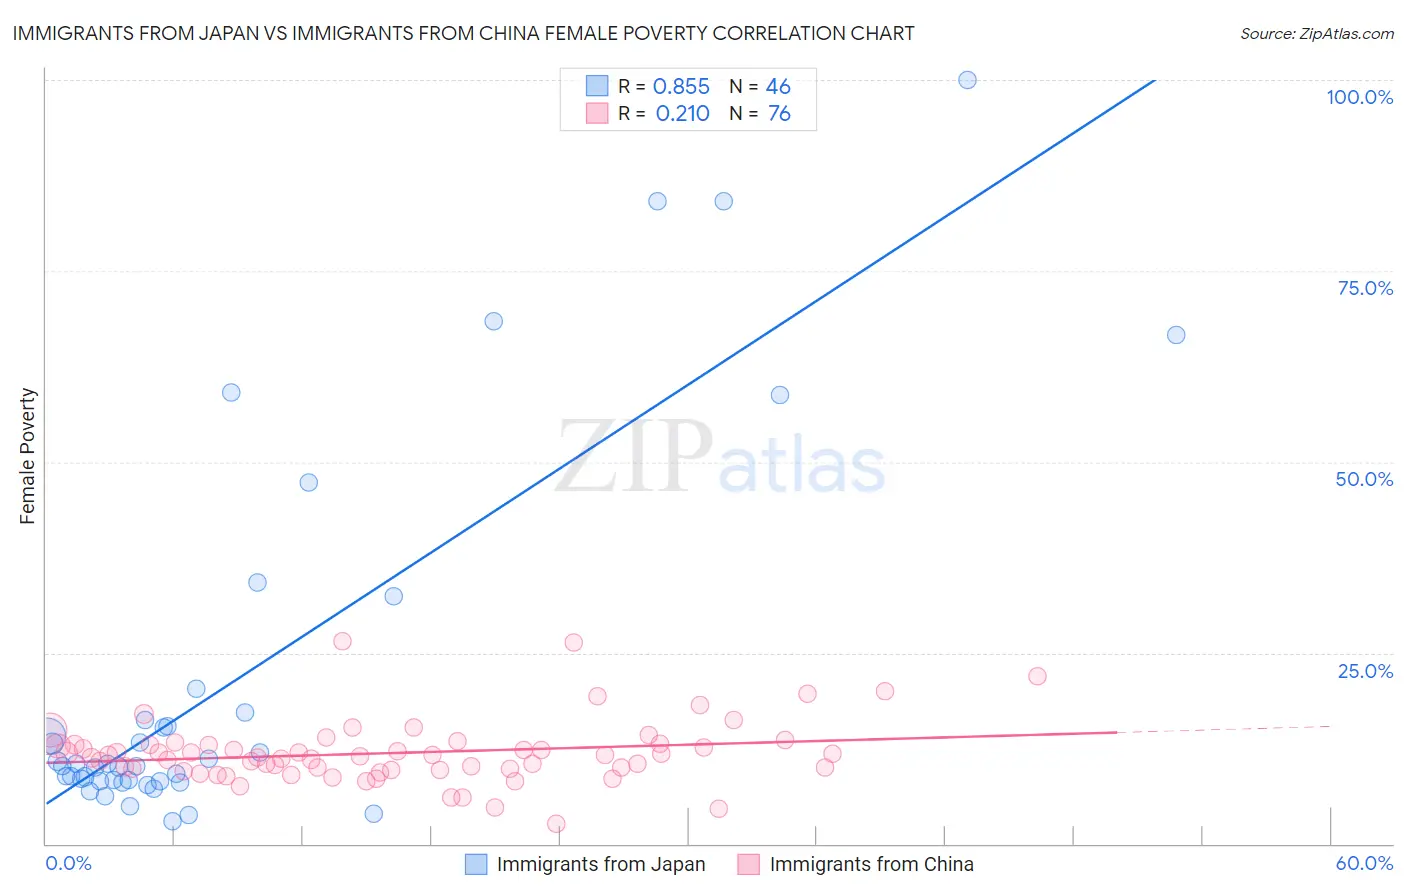 Immigrants from Japan vs Immigrants from China Female Poverty